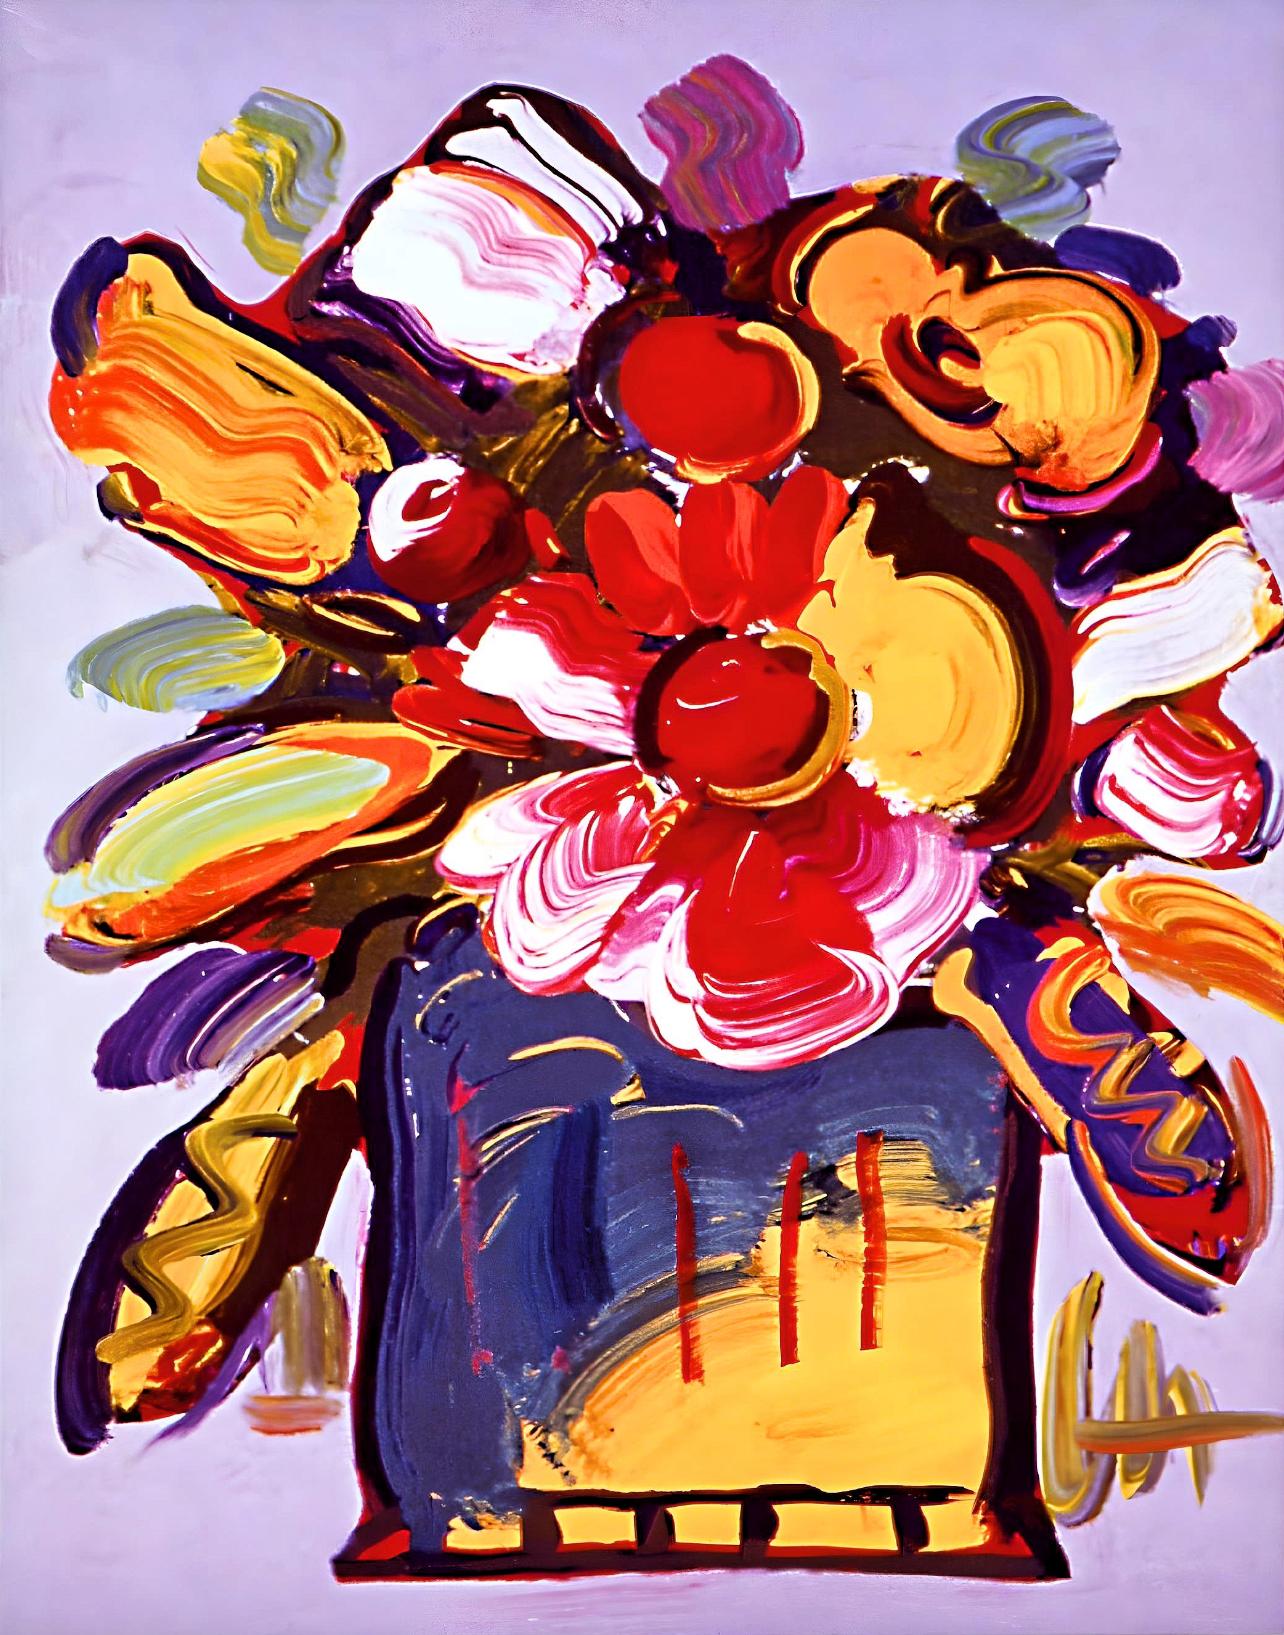 Artist: Peter Max (1937)
Title: Abstract Flowers II
Year: 2007
Edition: 500/500, plus proofs
Medium: Lithograph on archival paper
Size: 8 x 6 inches
Condition: Excellent
Inscription: Signed and numbered by the artist.
Notes: Published by Via